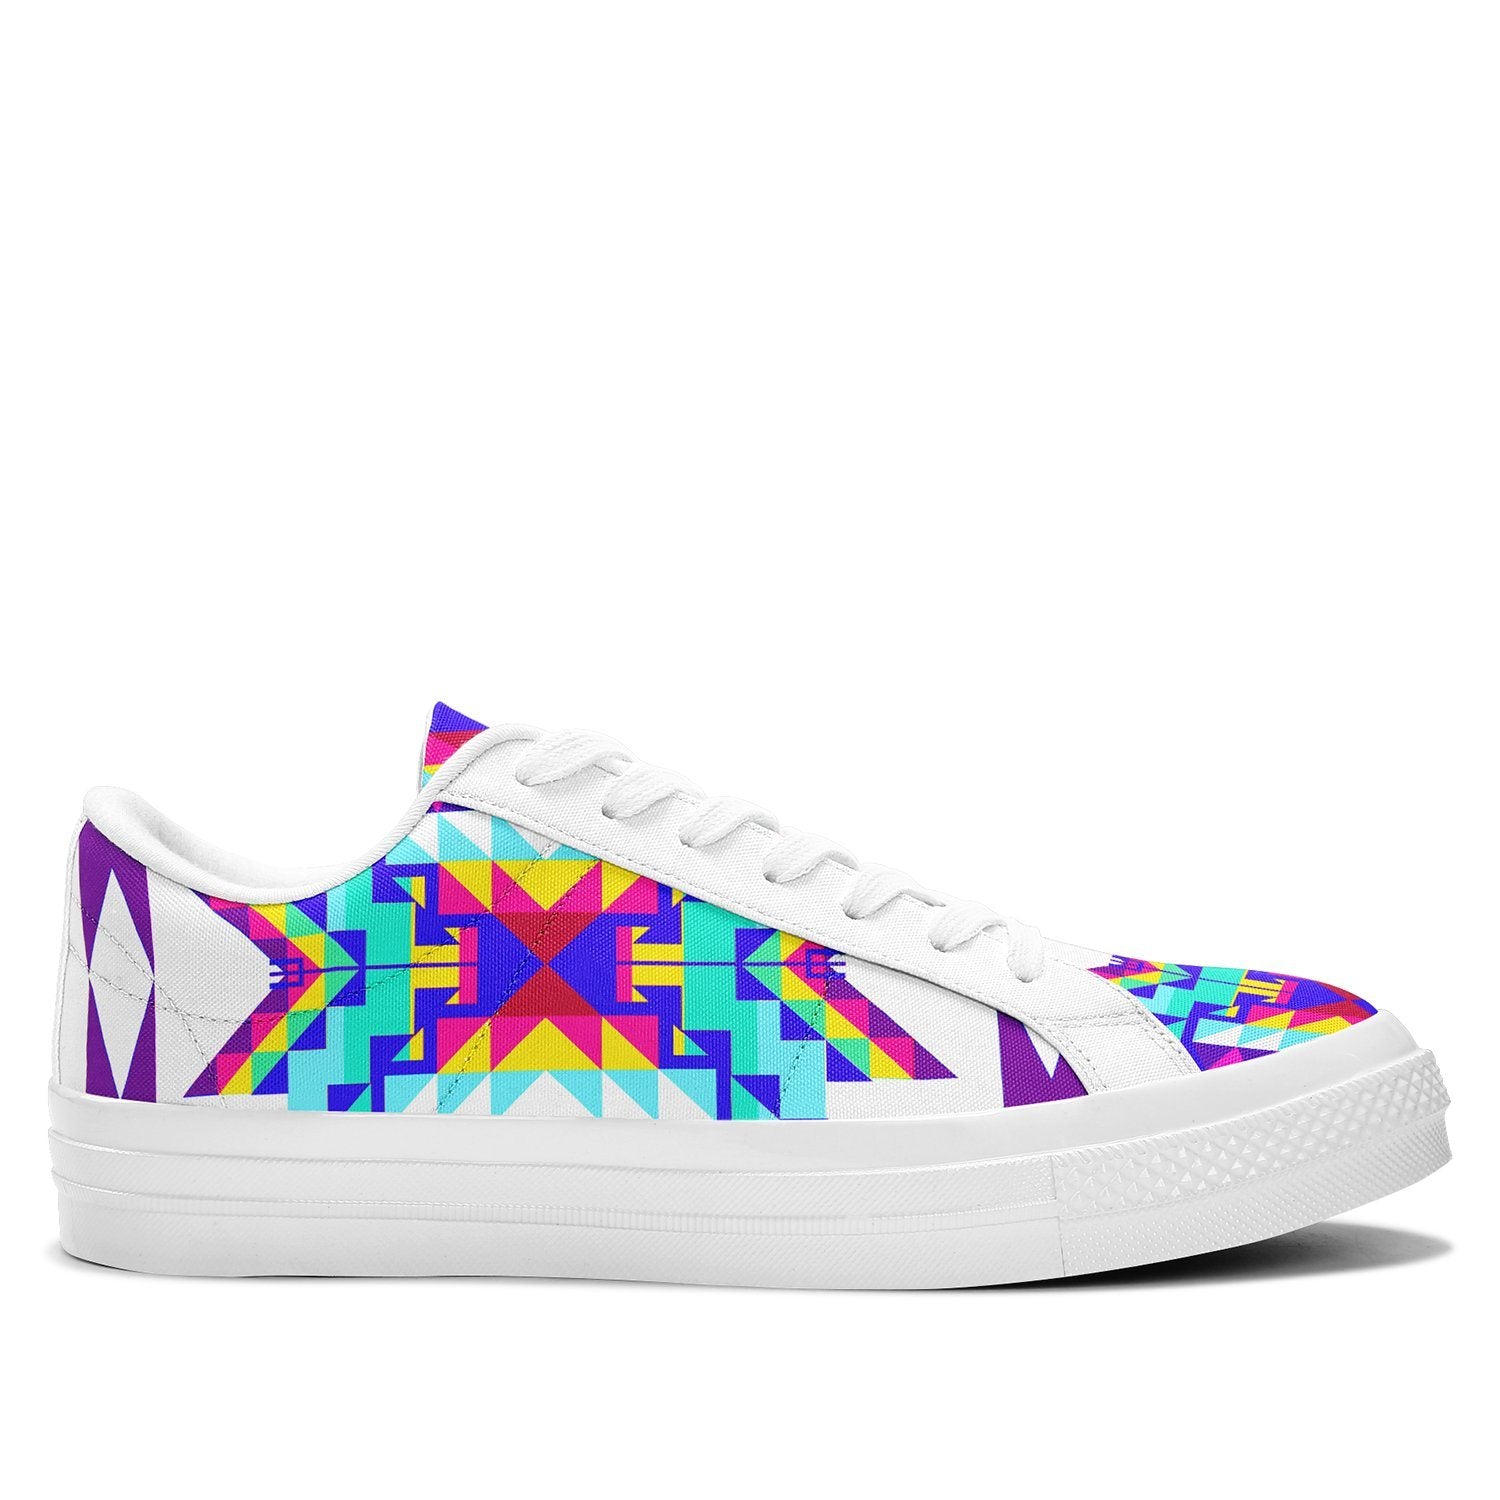 Fancy Champion Aapisi Low Top Canvas Shoes White Sole aapisi Herman 